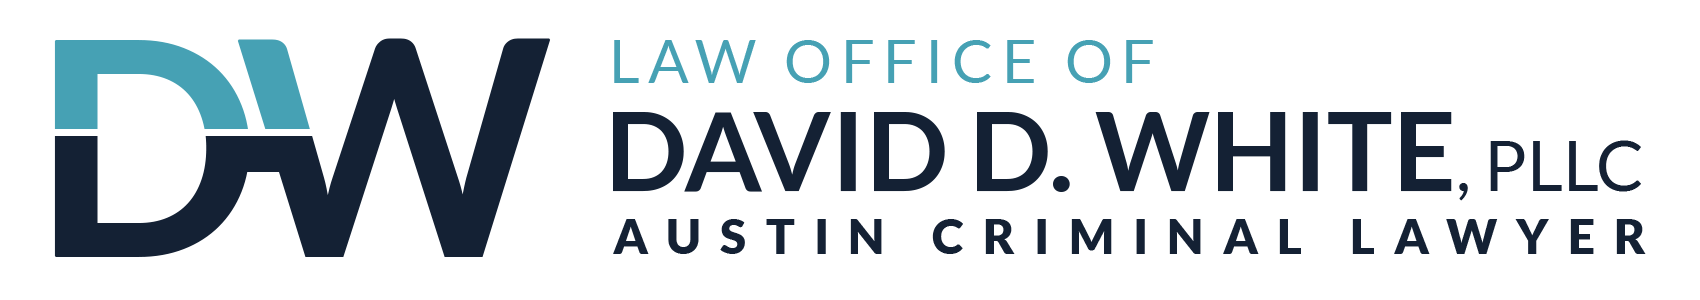 The Law Office of David D. White, PLLC: Austin Criminal Lawyer cover